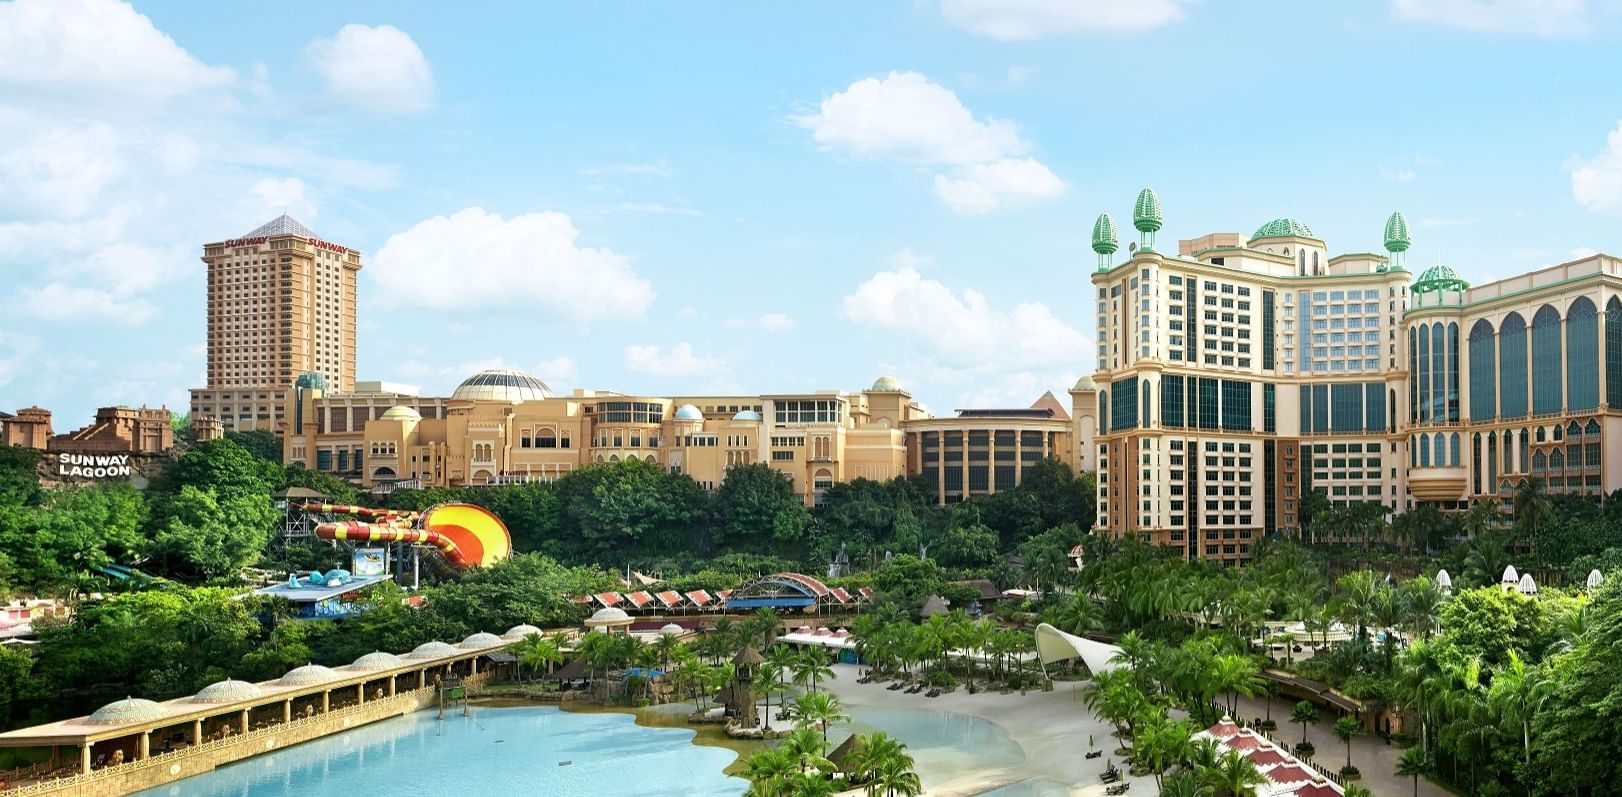 Aerial view of the pool side at Sunway Resort